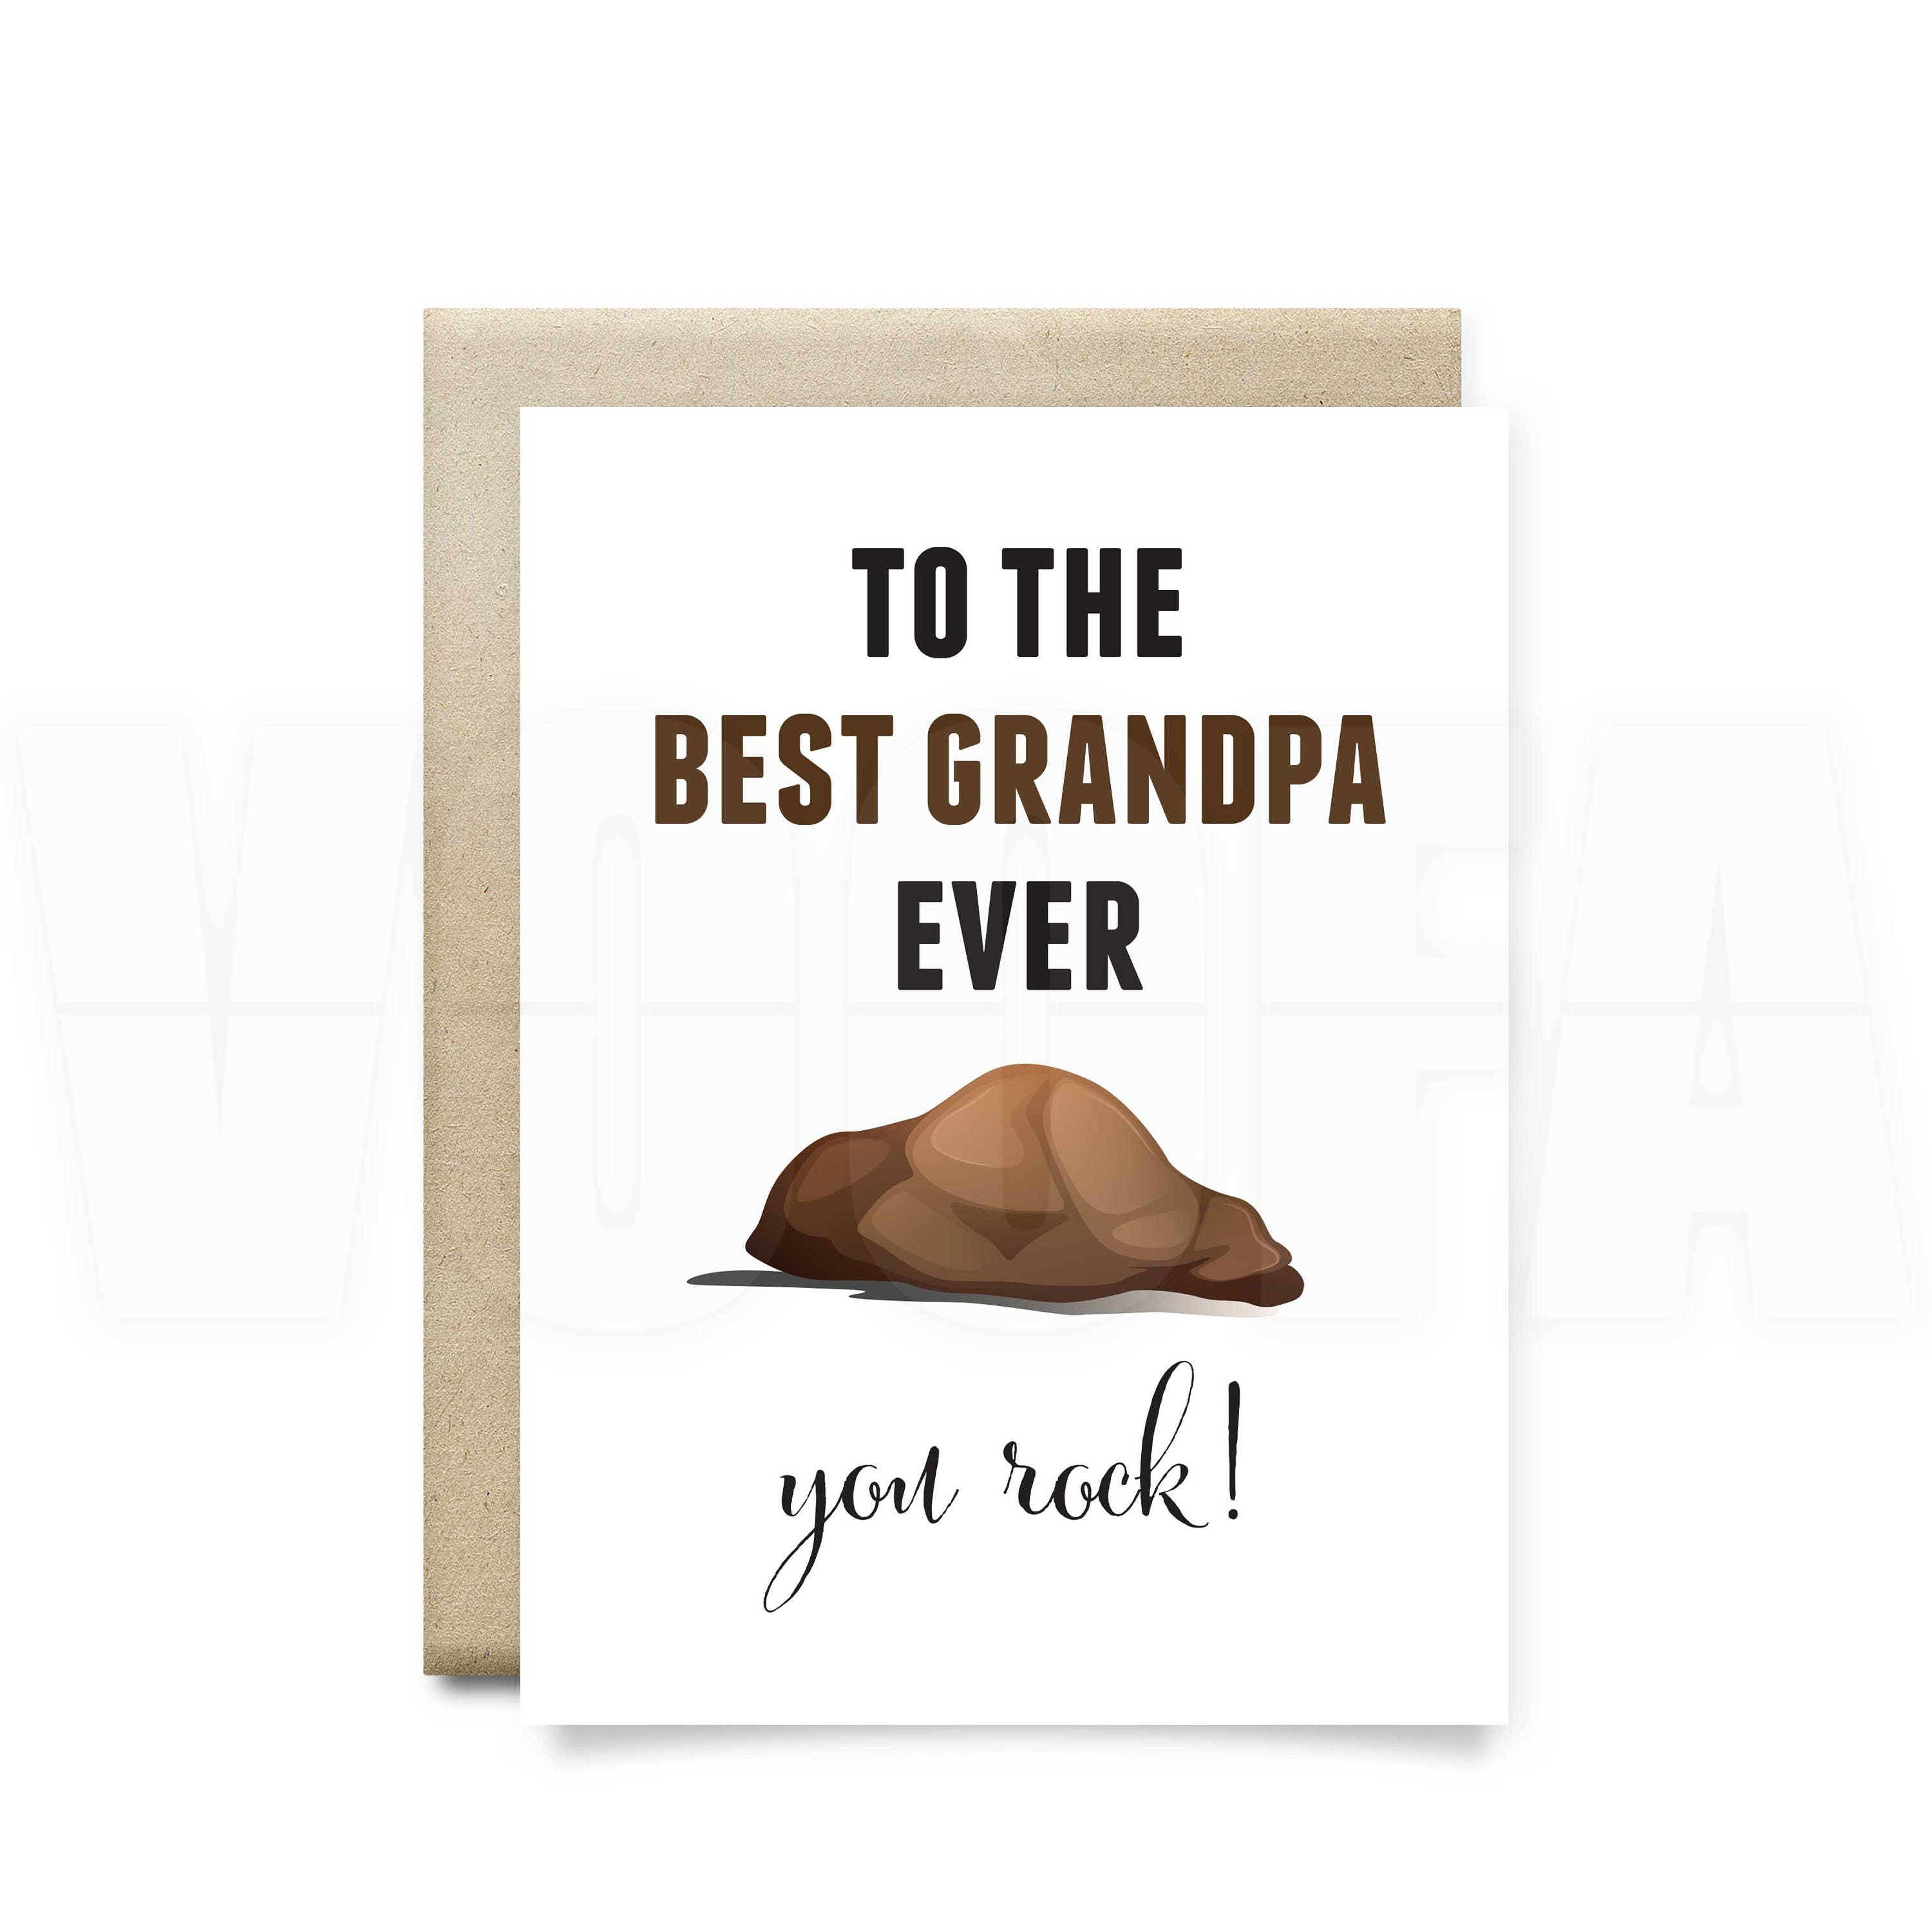 the-21-best-ideas-for-funny-birthday-cards-for-grandpa-home-family-style-and-art-ideas